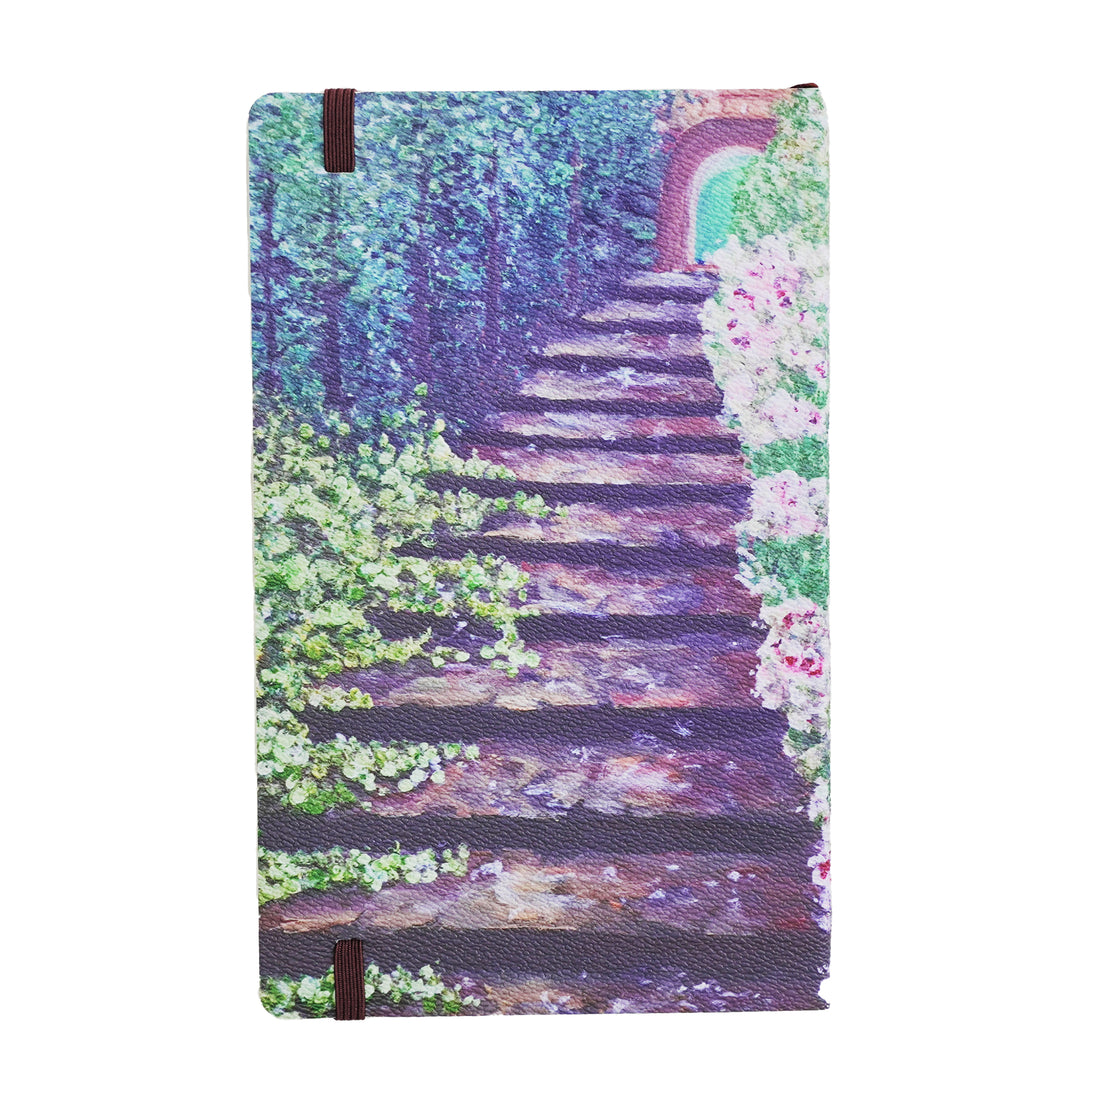 STAIRWAY TO EDEN, Arcadia Collection, Softcover Journal, Plain pages